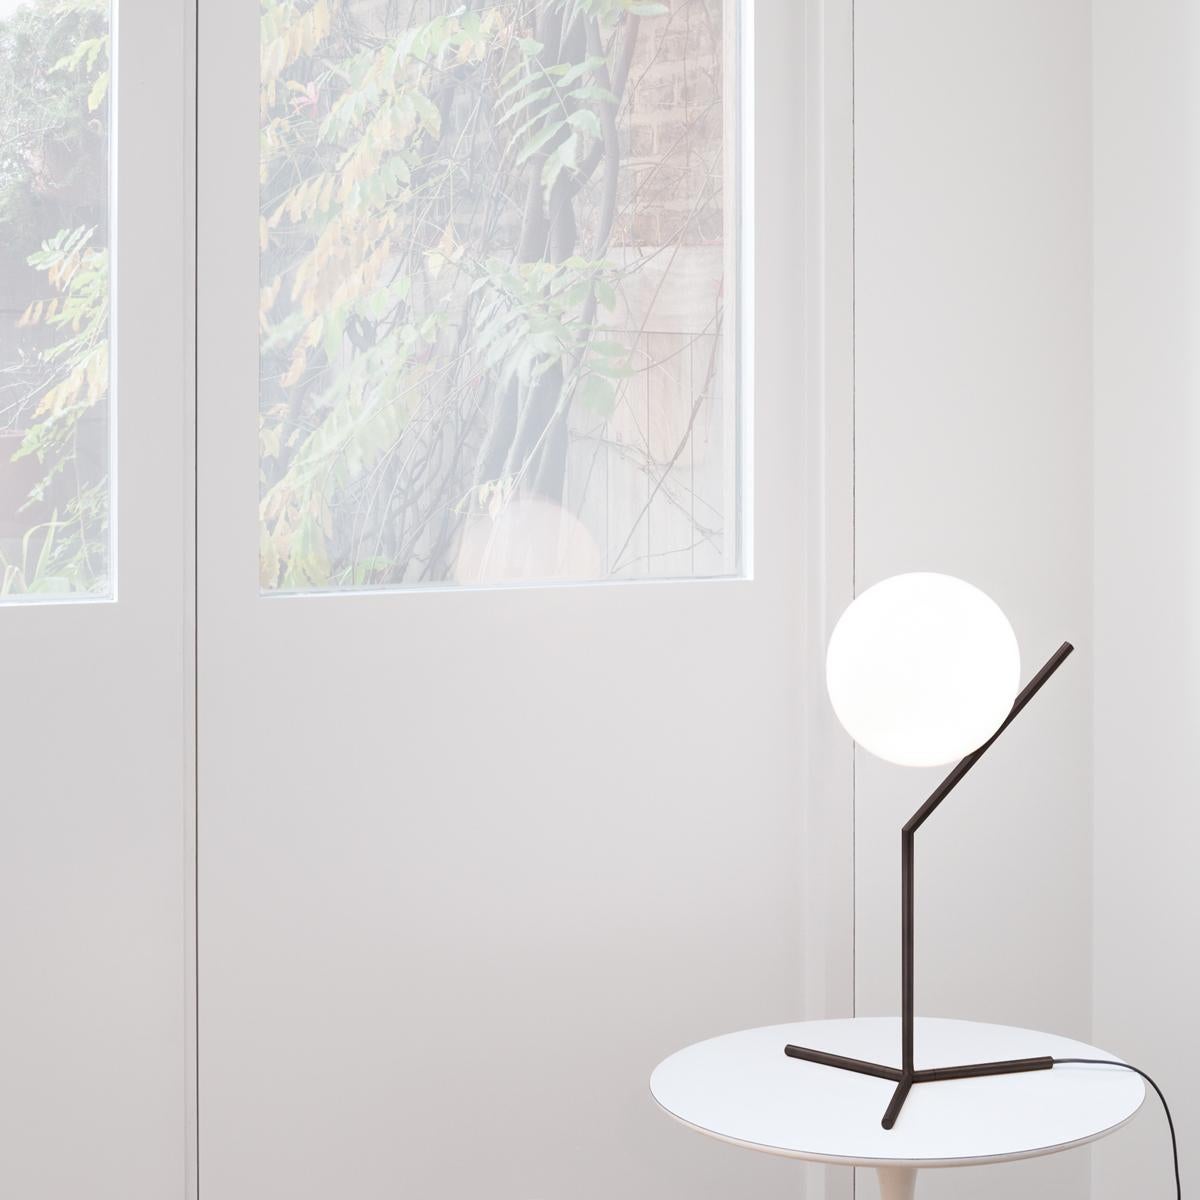 FLOS IC Lights T1 High Table Lamp in Black by Michael Anastassiades

Like the other pieces in his IC Light Series, the IC Lights T balances designer Michael Anastassiades’ love of industrial simplicity with intricate symbolism. It provides diffused